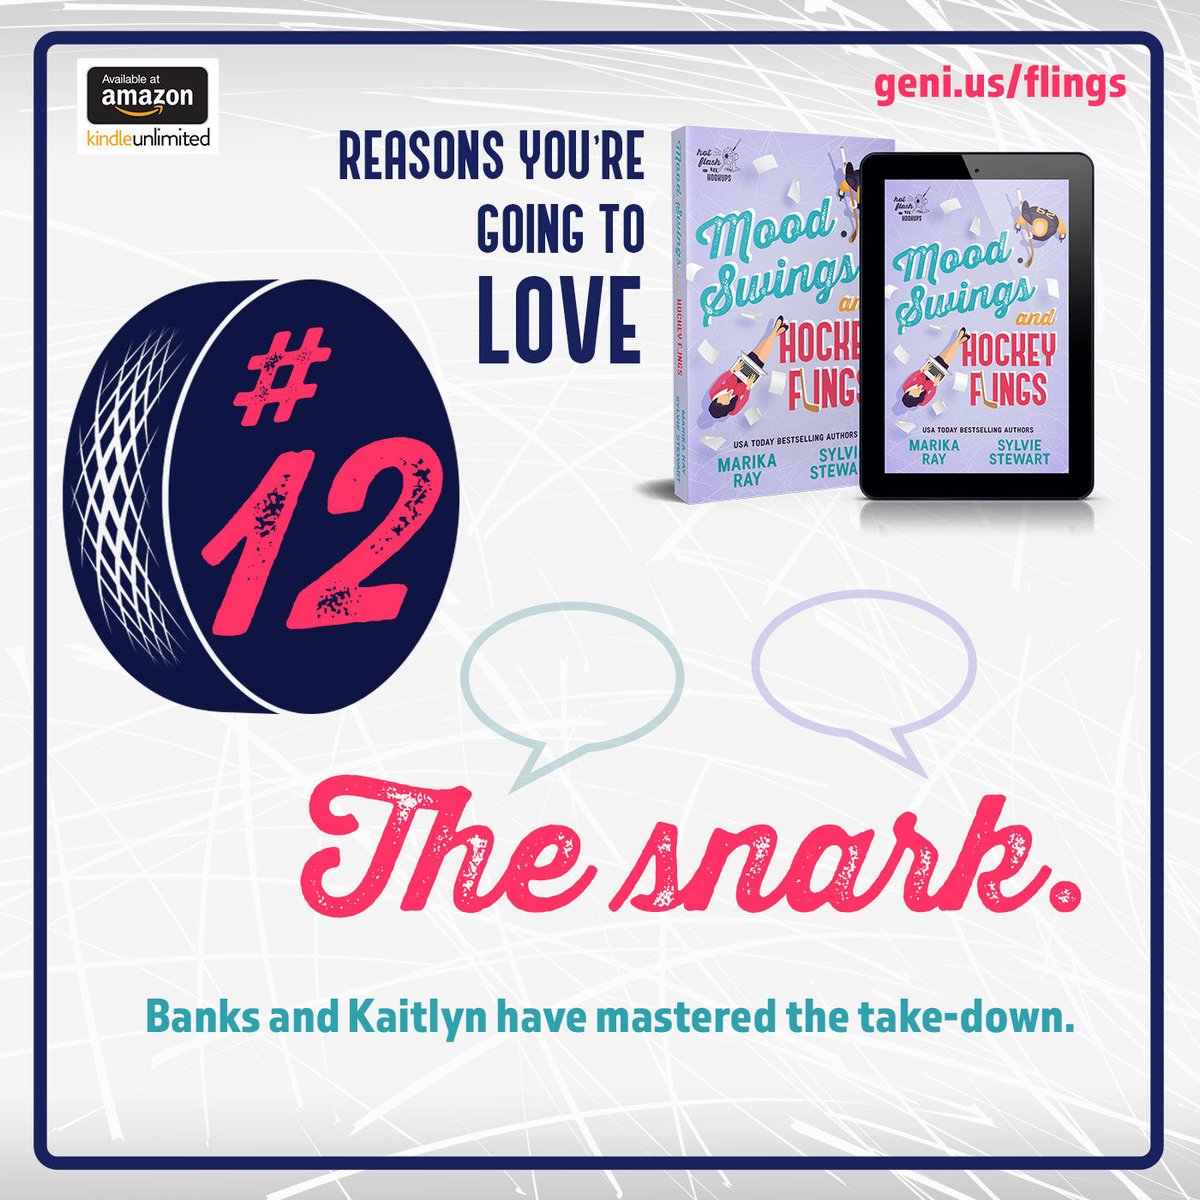 What is a steamy romcom without BANTER?!

Kaitlyn and Banks can throw down, people...

🏒  𝗠𝗼𝗼𝗱 𝗦𝘄𝗶𝗻𝗴𝘀 𝗮𝗻𝗱 𝗛𝗼𝗰𝗸𝗲𝘆 𝗙𝗹𝗶𝗻𝗴𝘀 
Now available in e-book and paperback: geni.us/flings
FR33 with KU
#enemiestolovers #hockeyromance #forcedproximity #forbidd